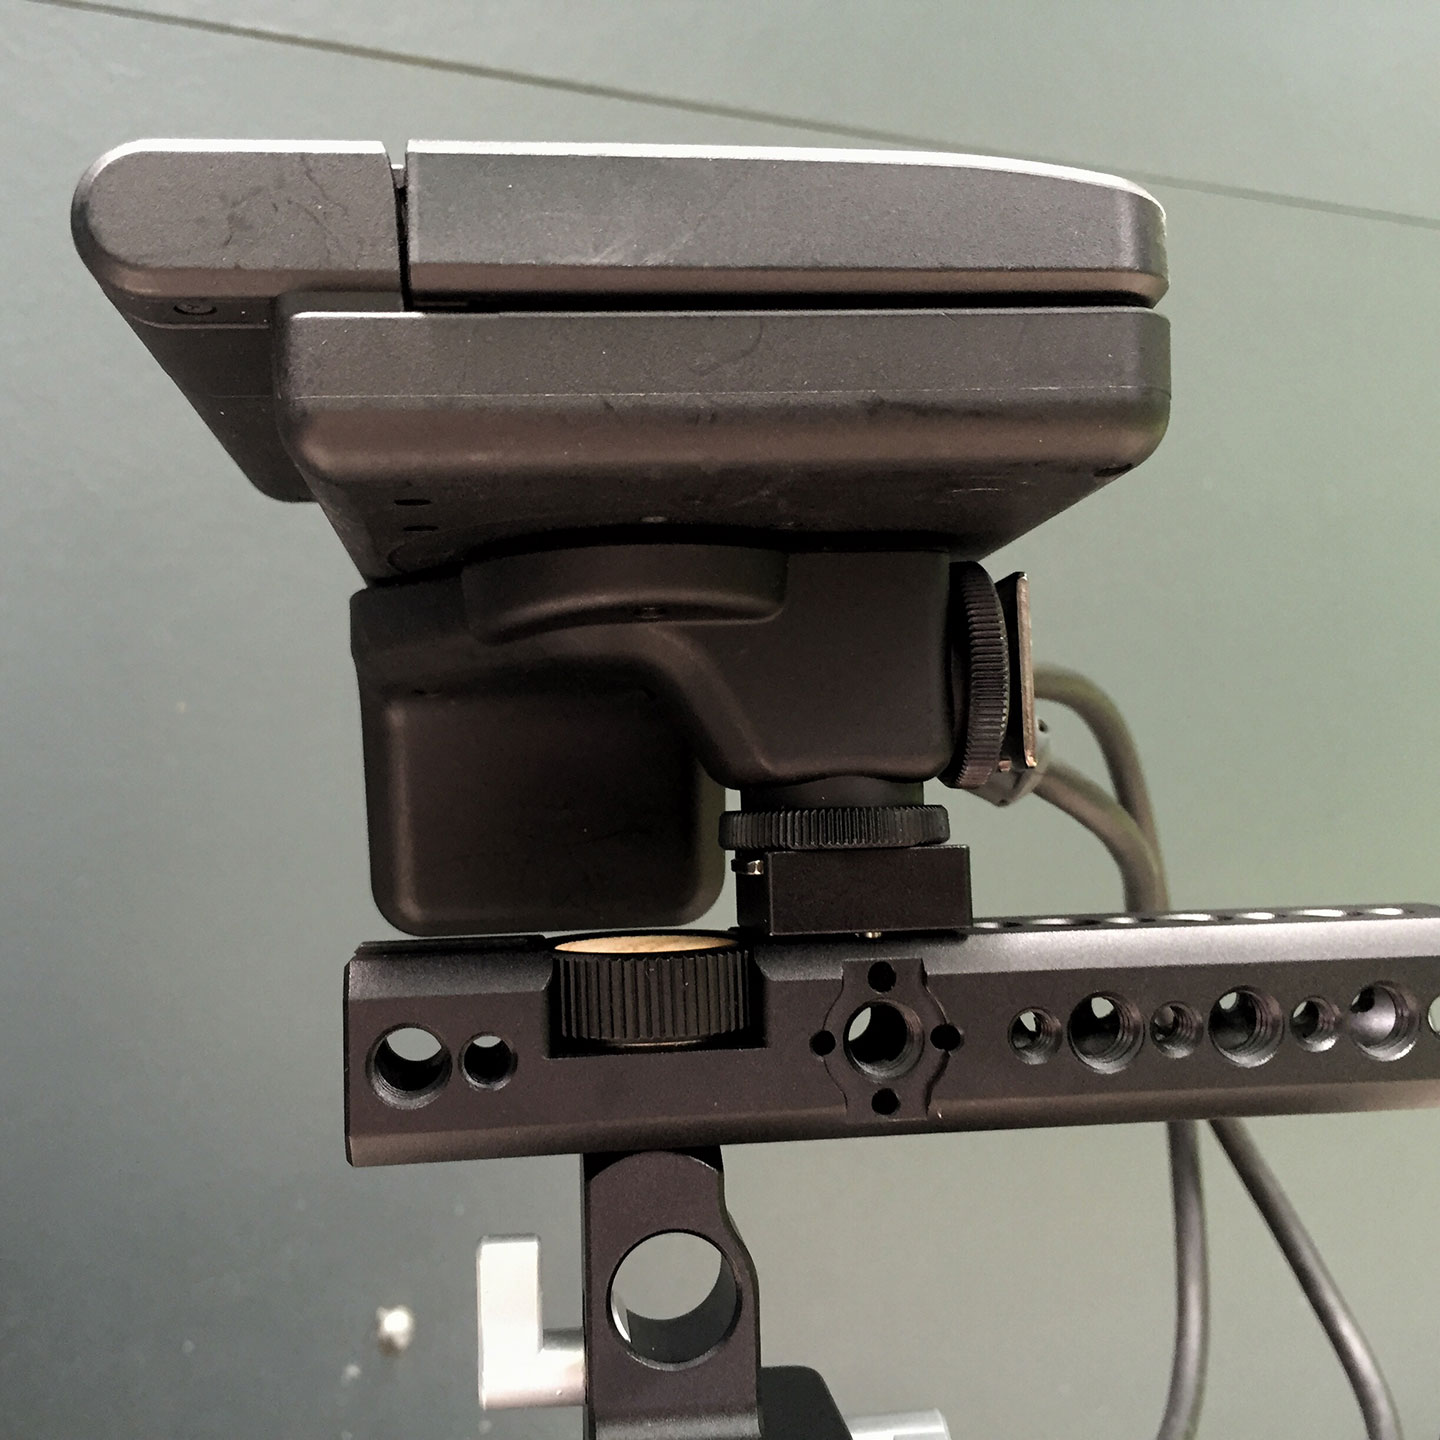 The Canon C300's monitor locked and loaded via the Wooden Camera NATO Handle (Plus) and the addition of the Universal Hot Shoe.